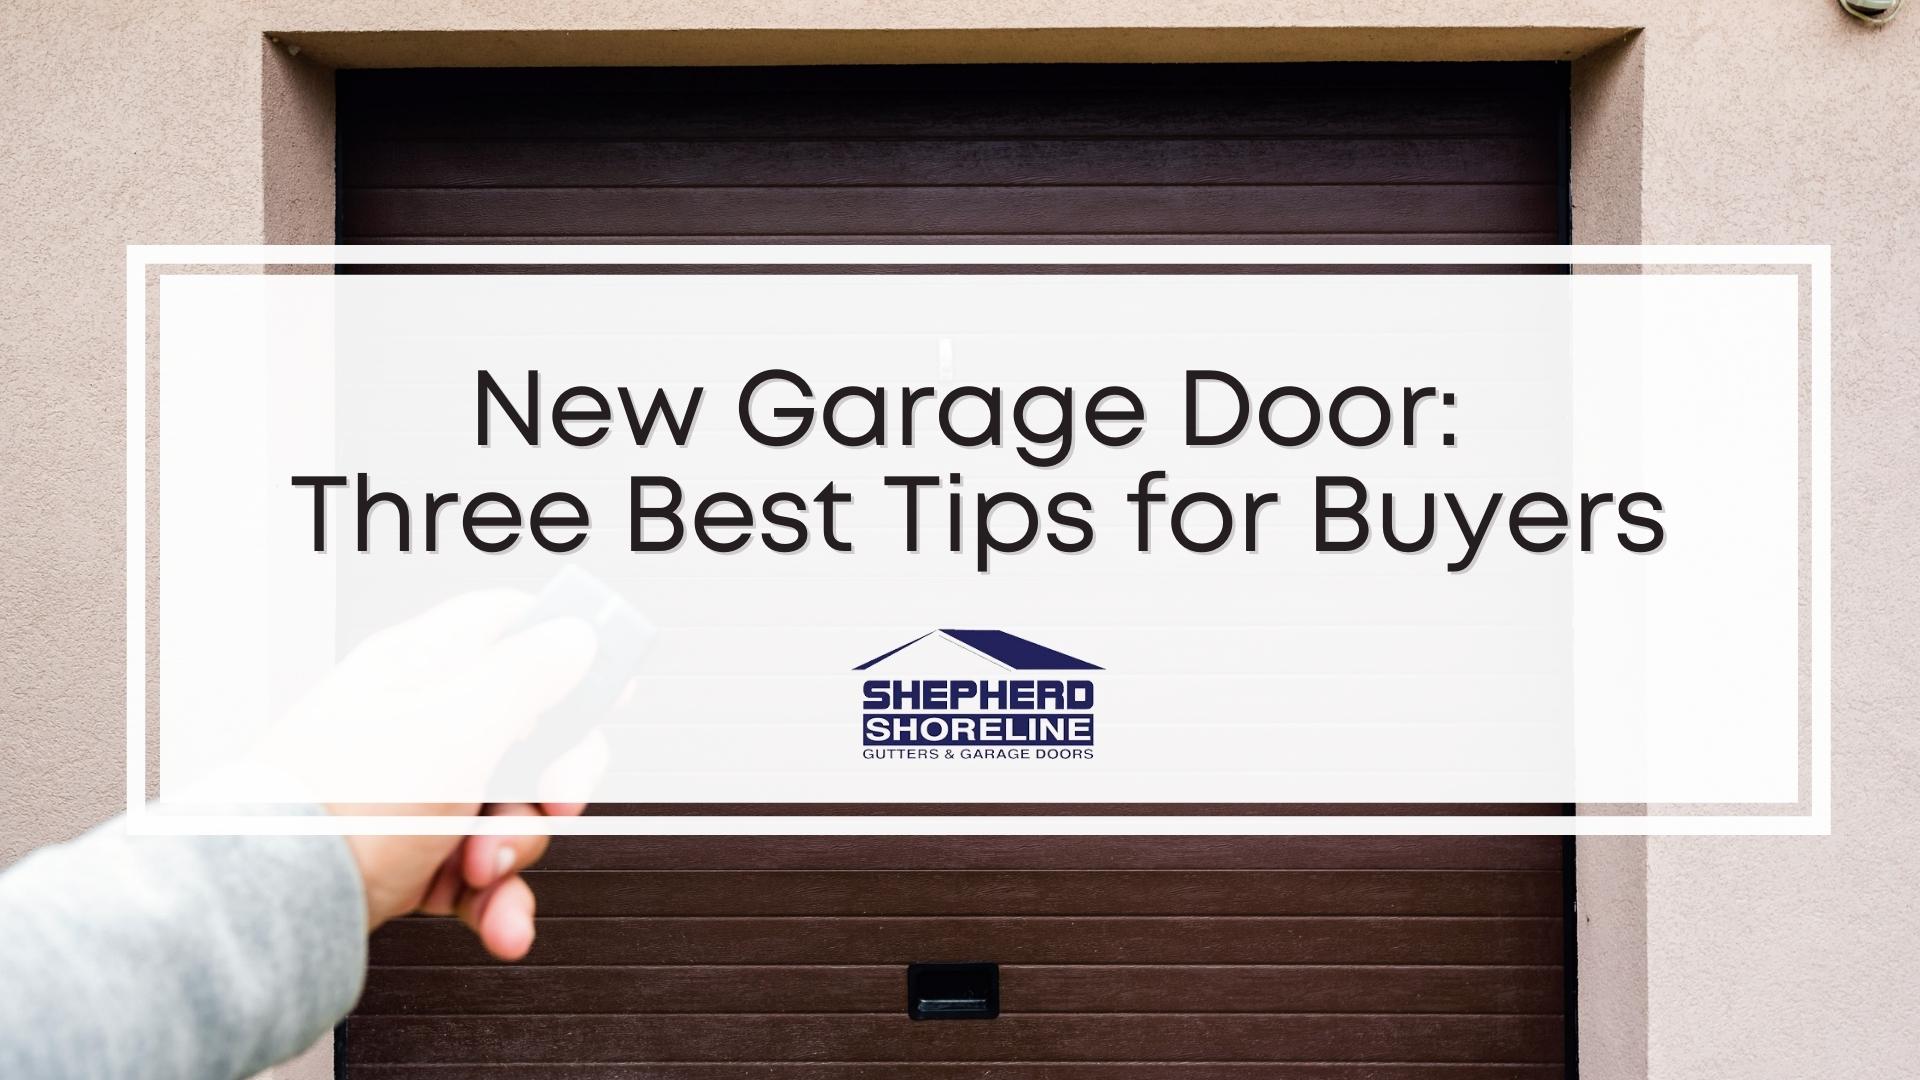 Are you about to buy a new garage door to boost your home's curb appeal and value? Lear these three crucial tips here!